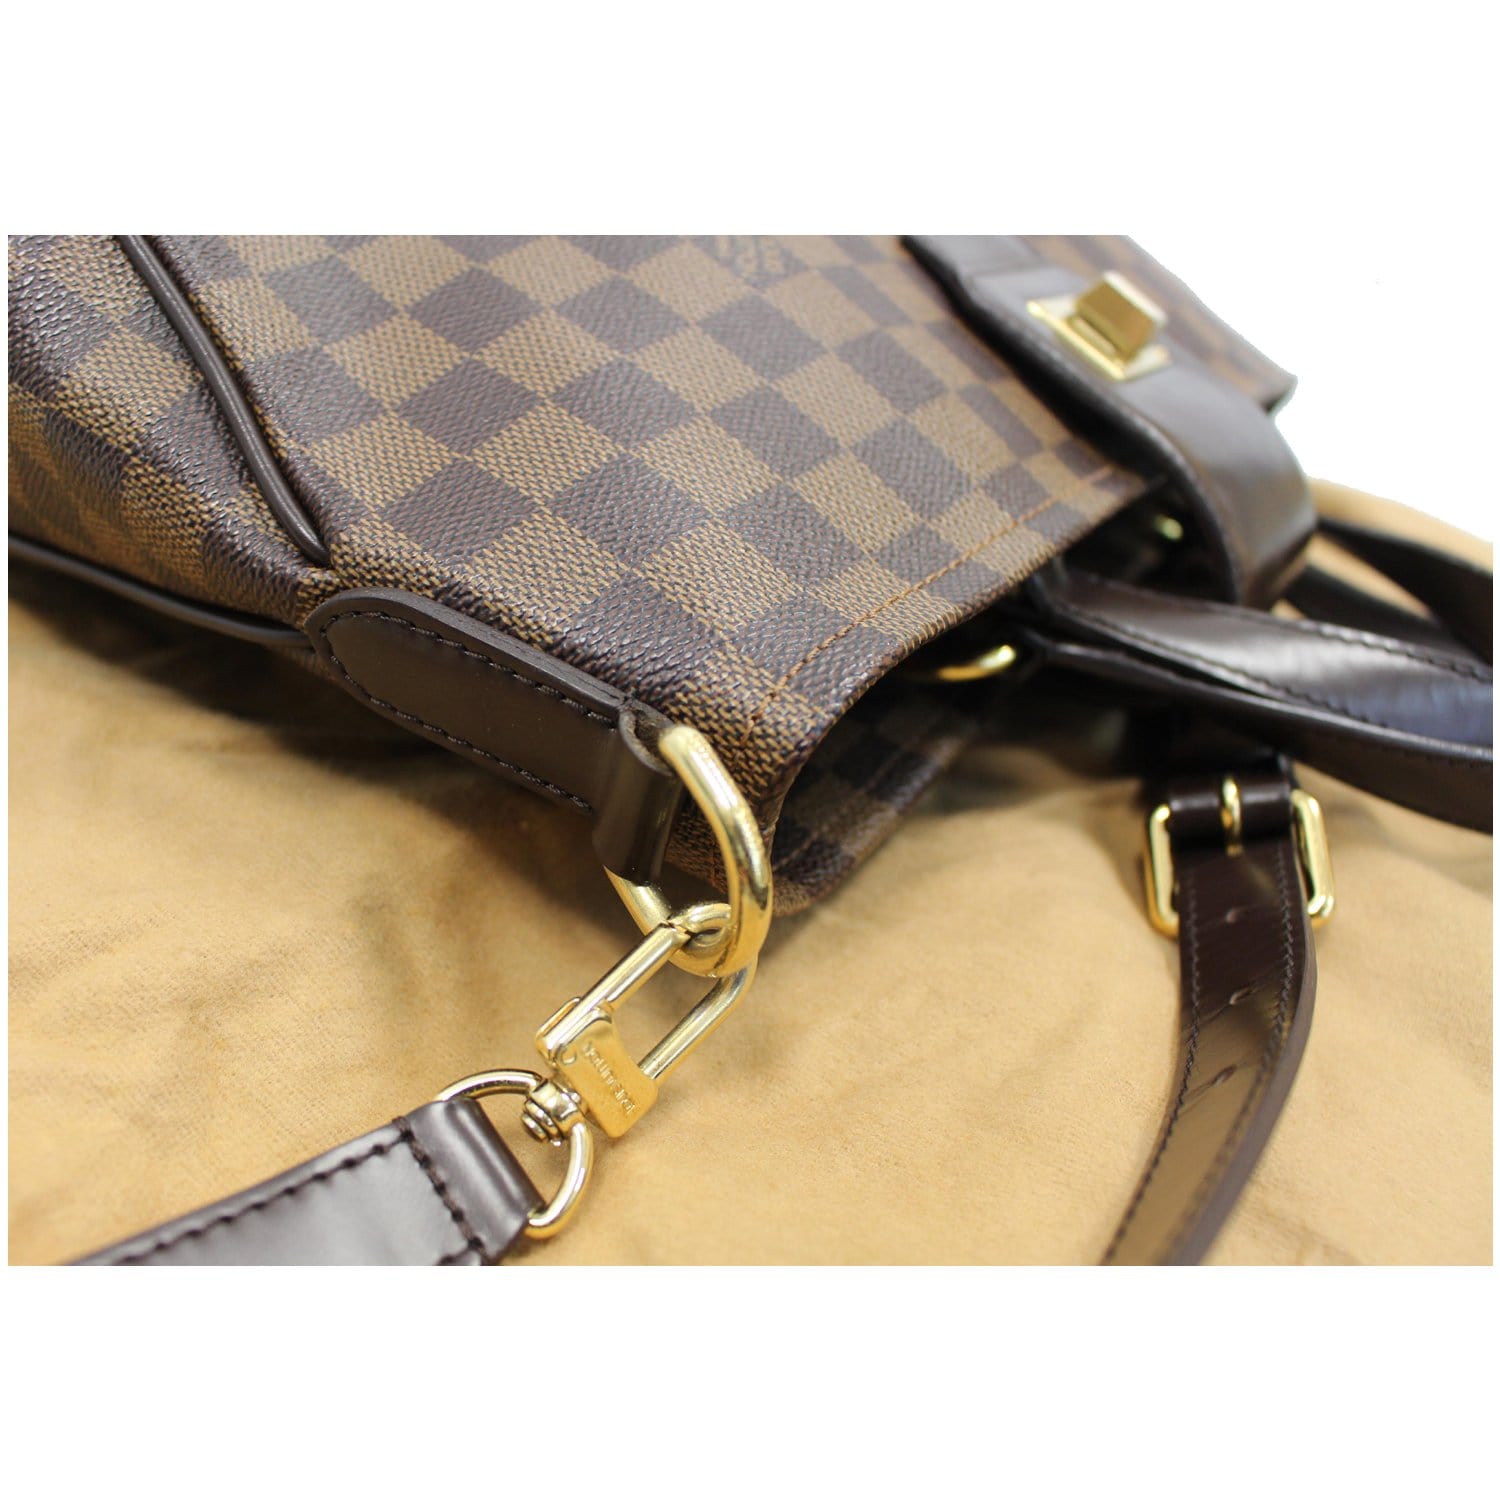 LV cabas rosebery perfect for fall 🍃🍁🍂